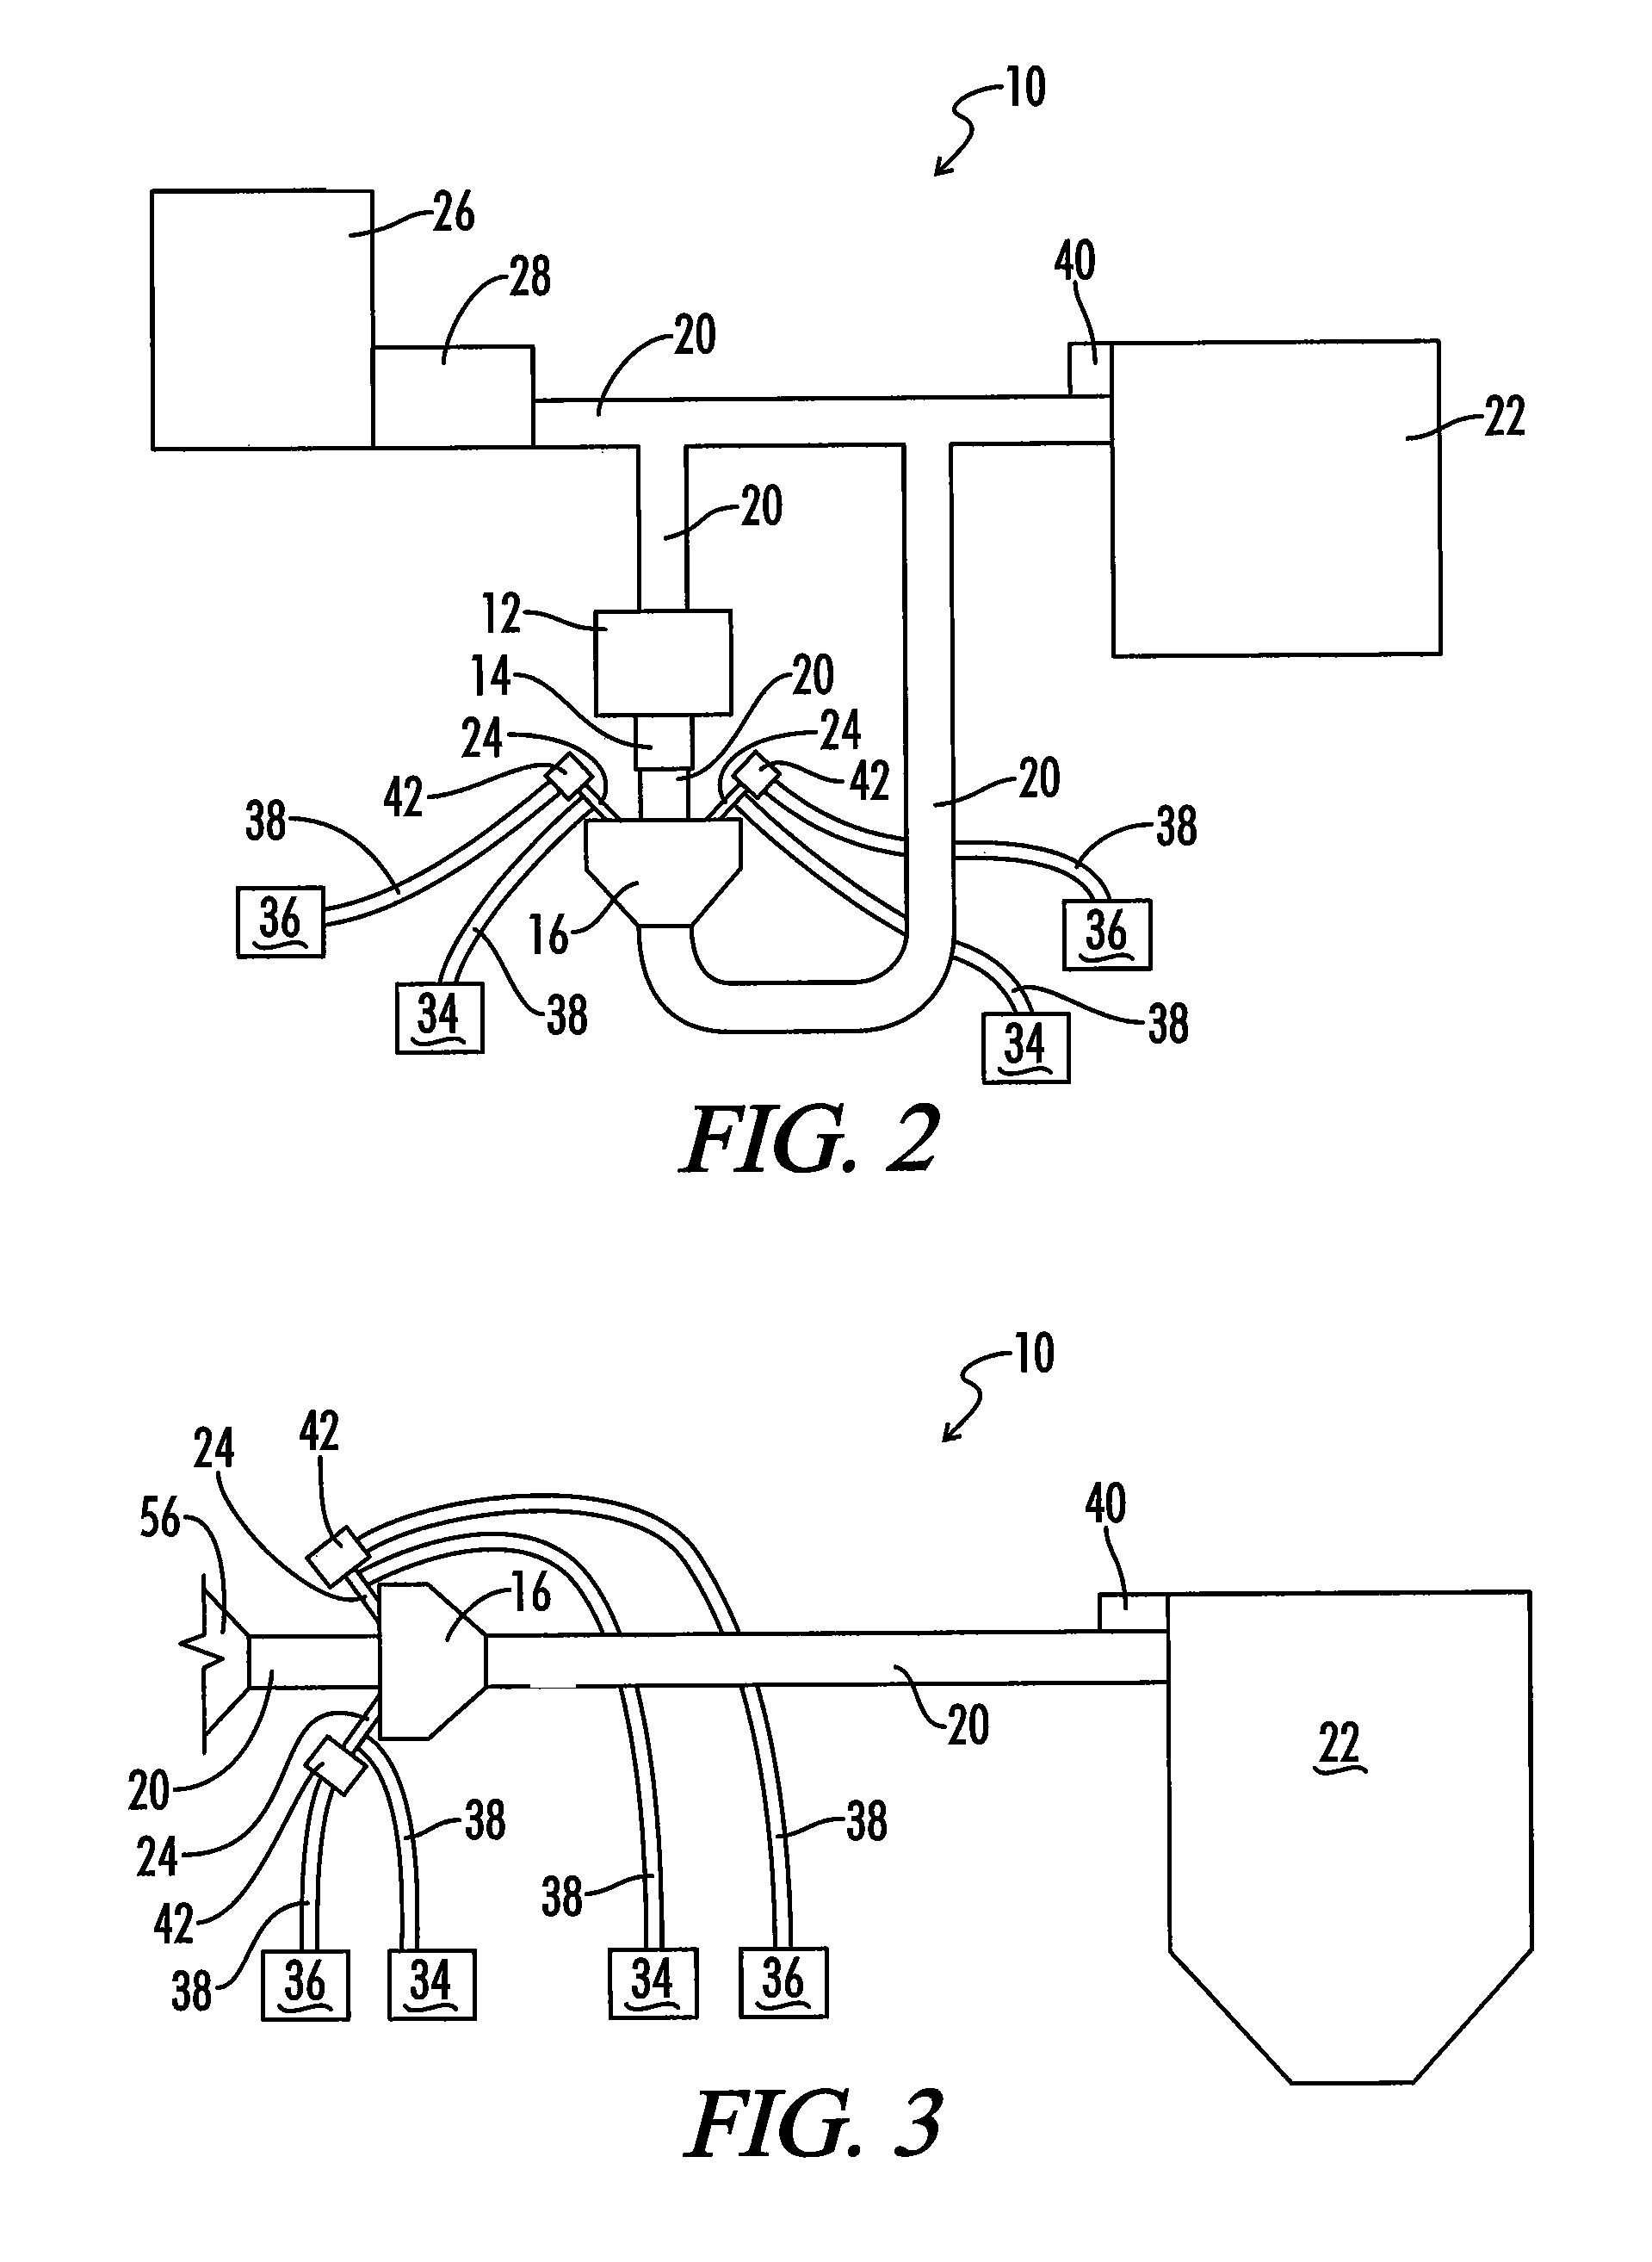 Fly ash treatment system and method of use thereof